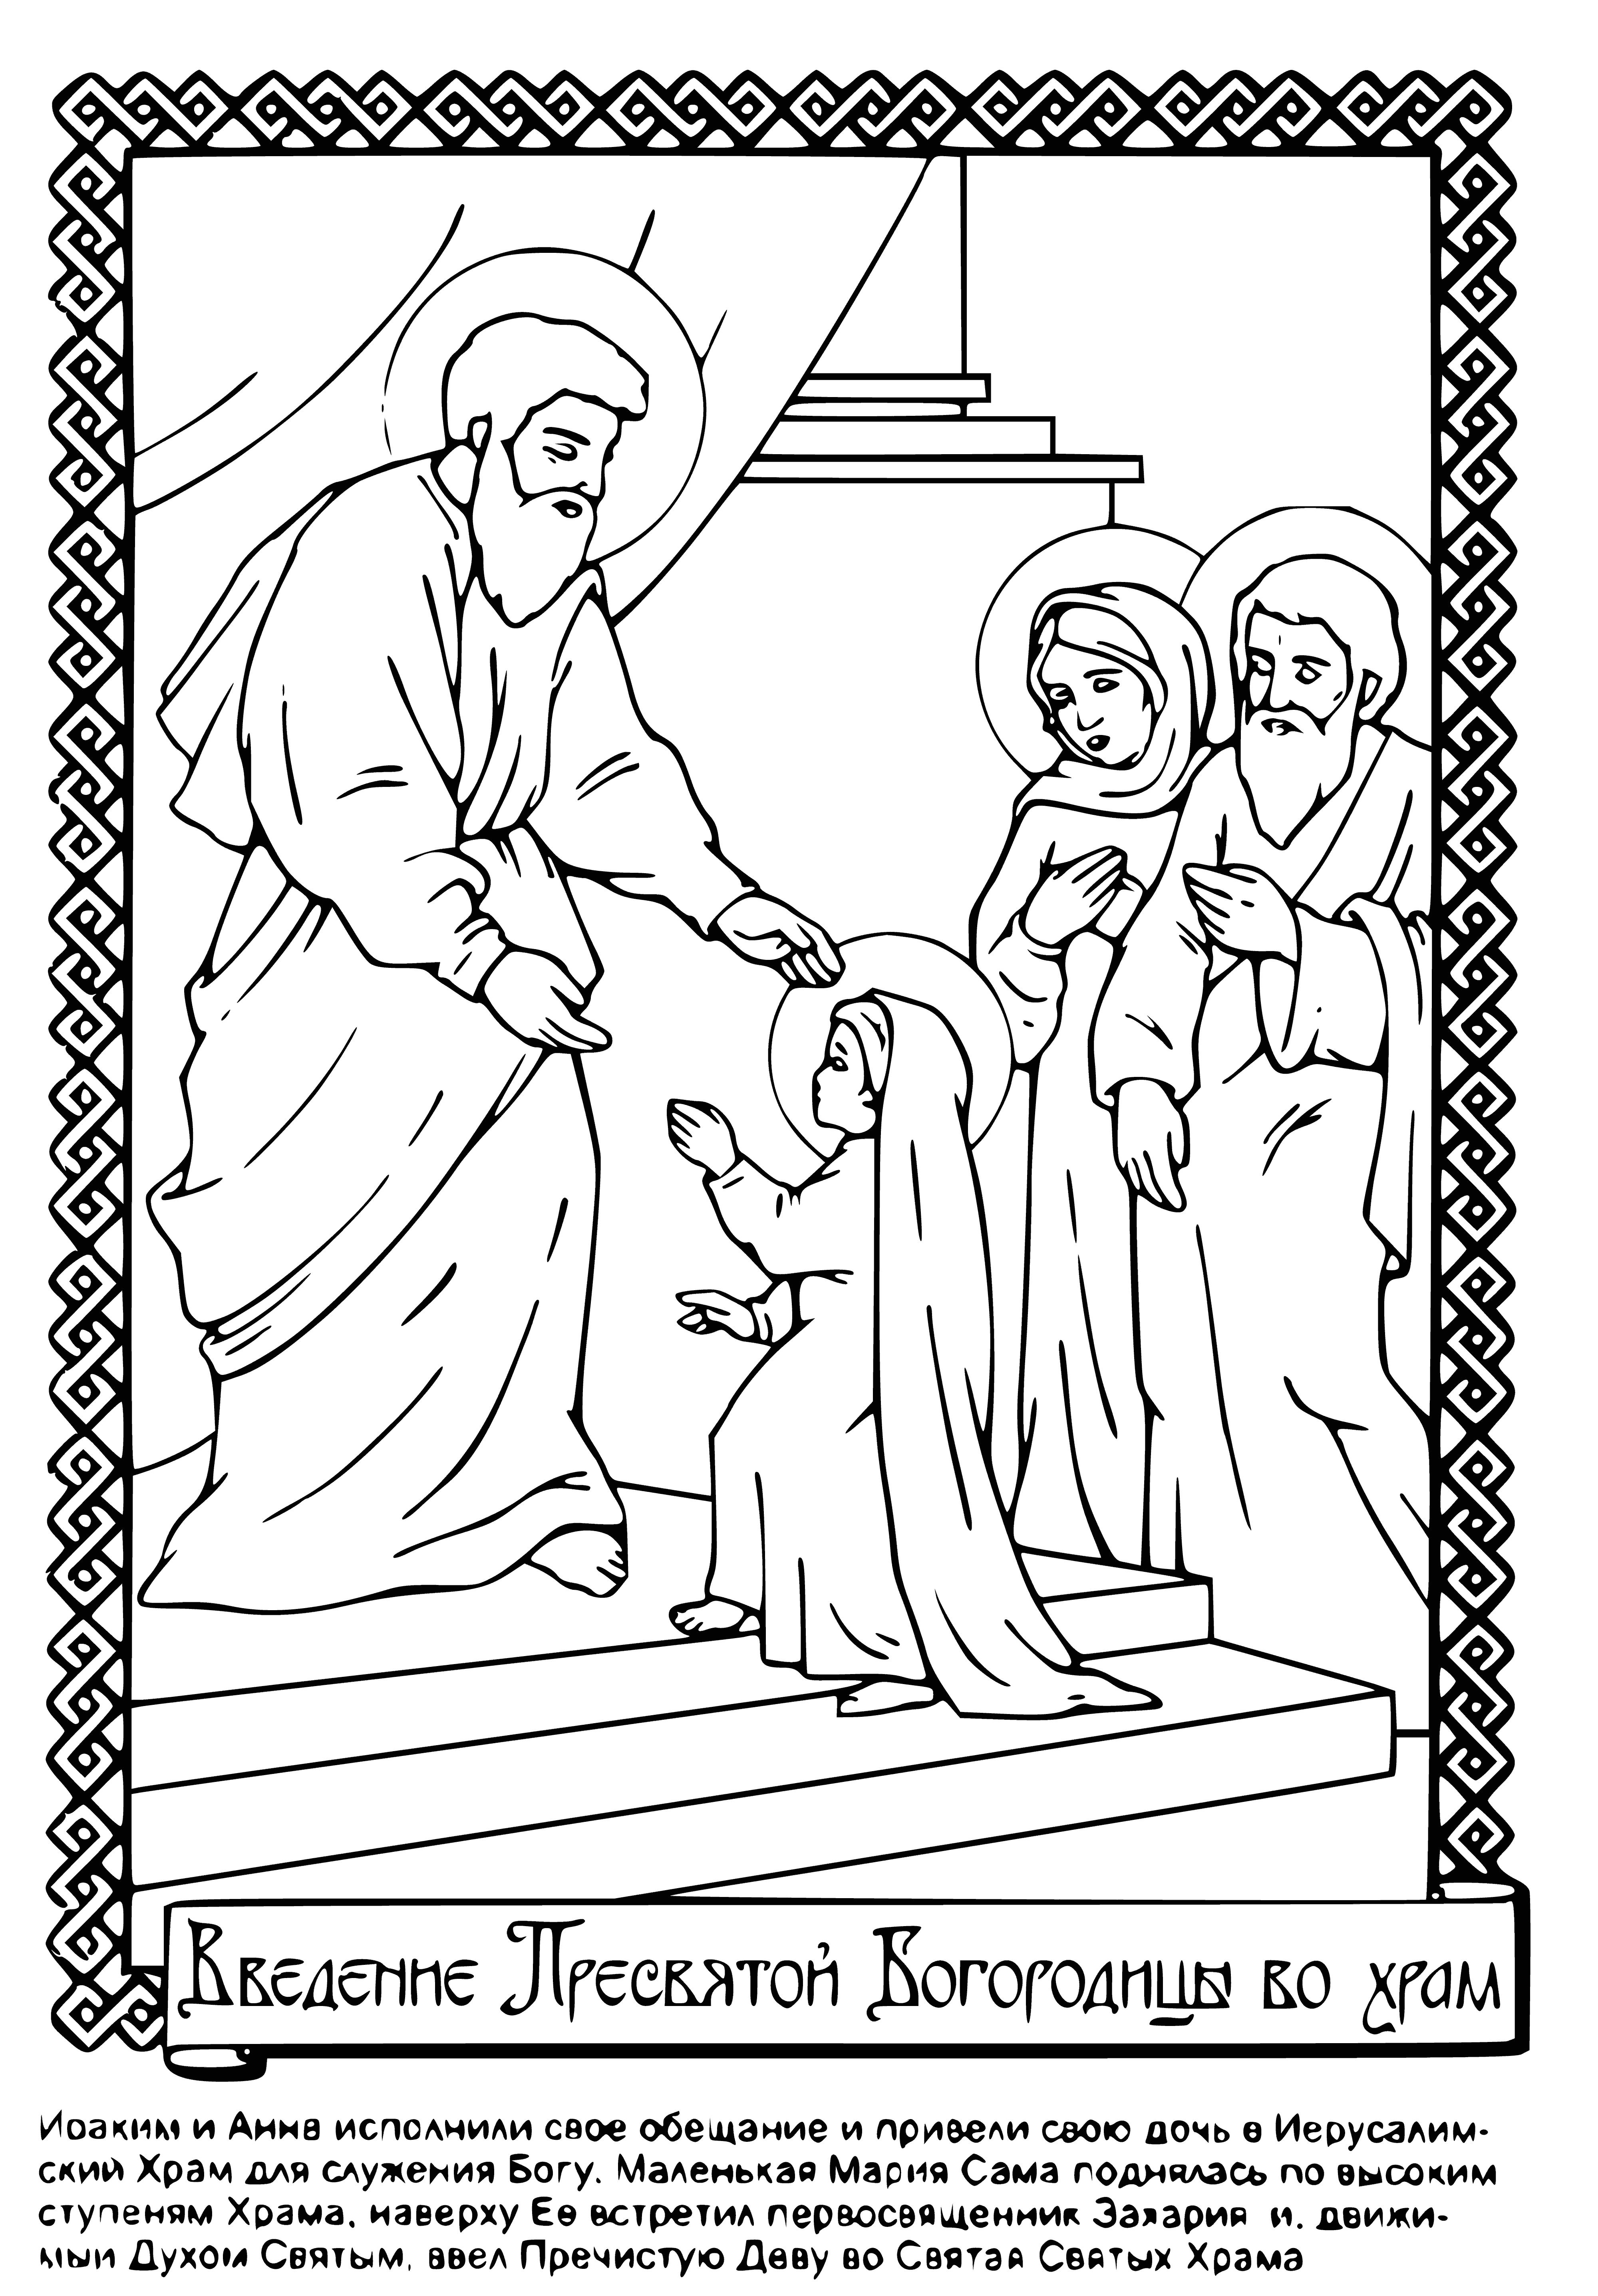 Introduction of the Virgin coloring page